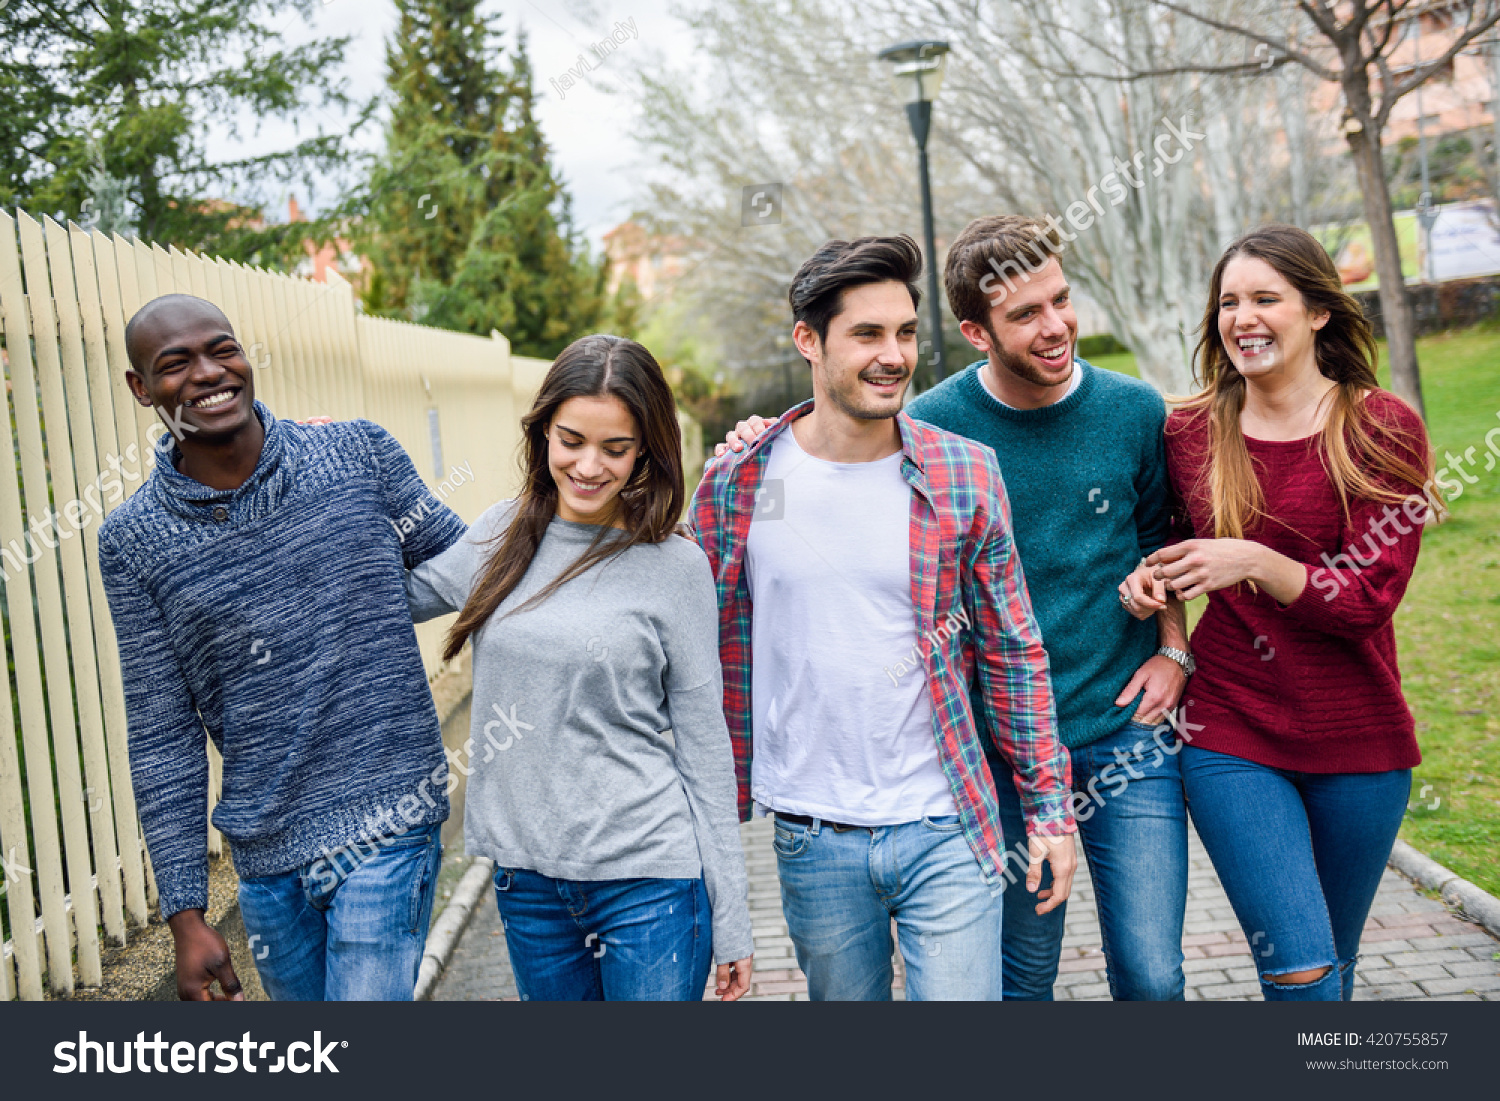 Group Multiethnic Young People Having Fun Stock Photo 420755857